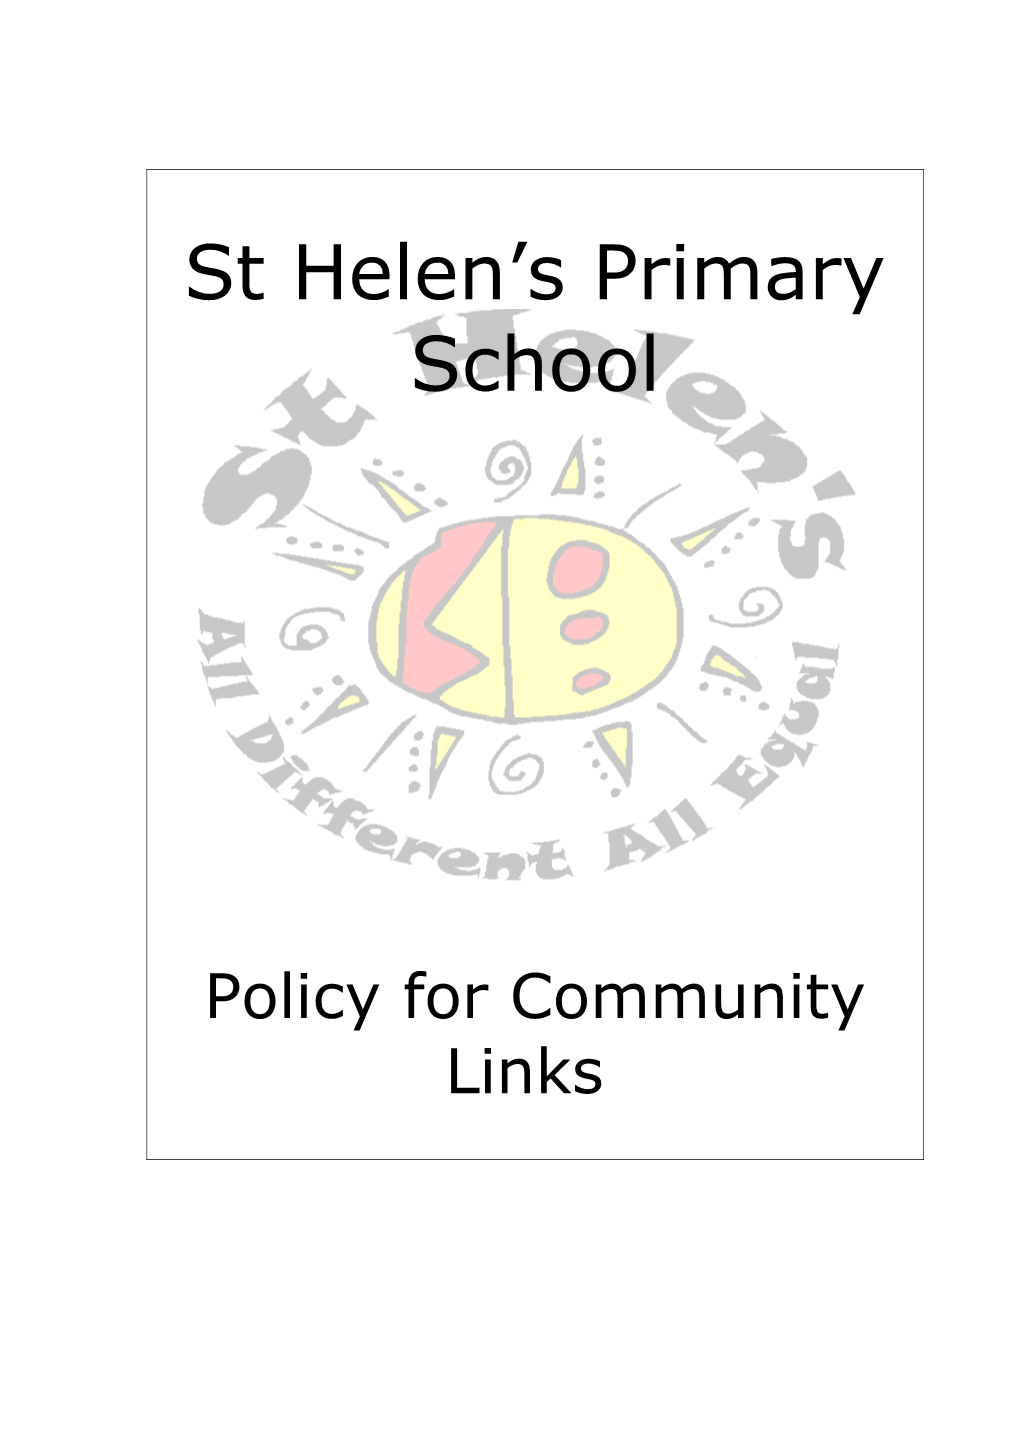 Policy for Community Links